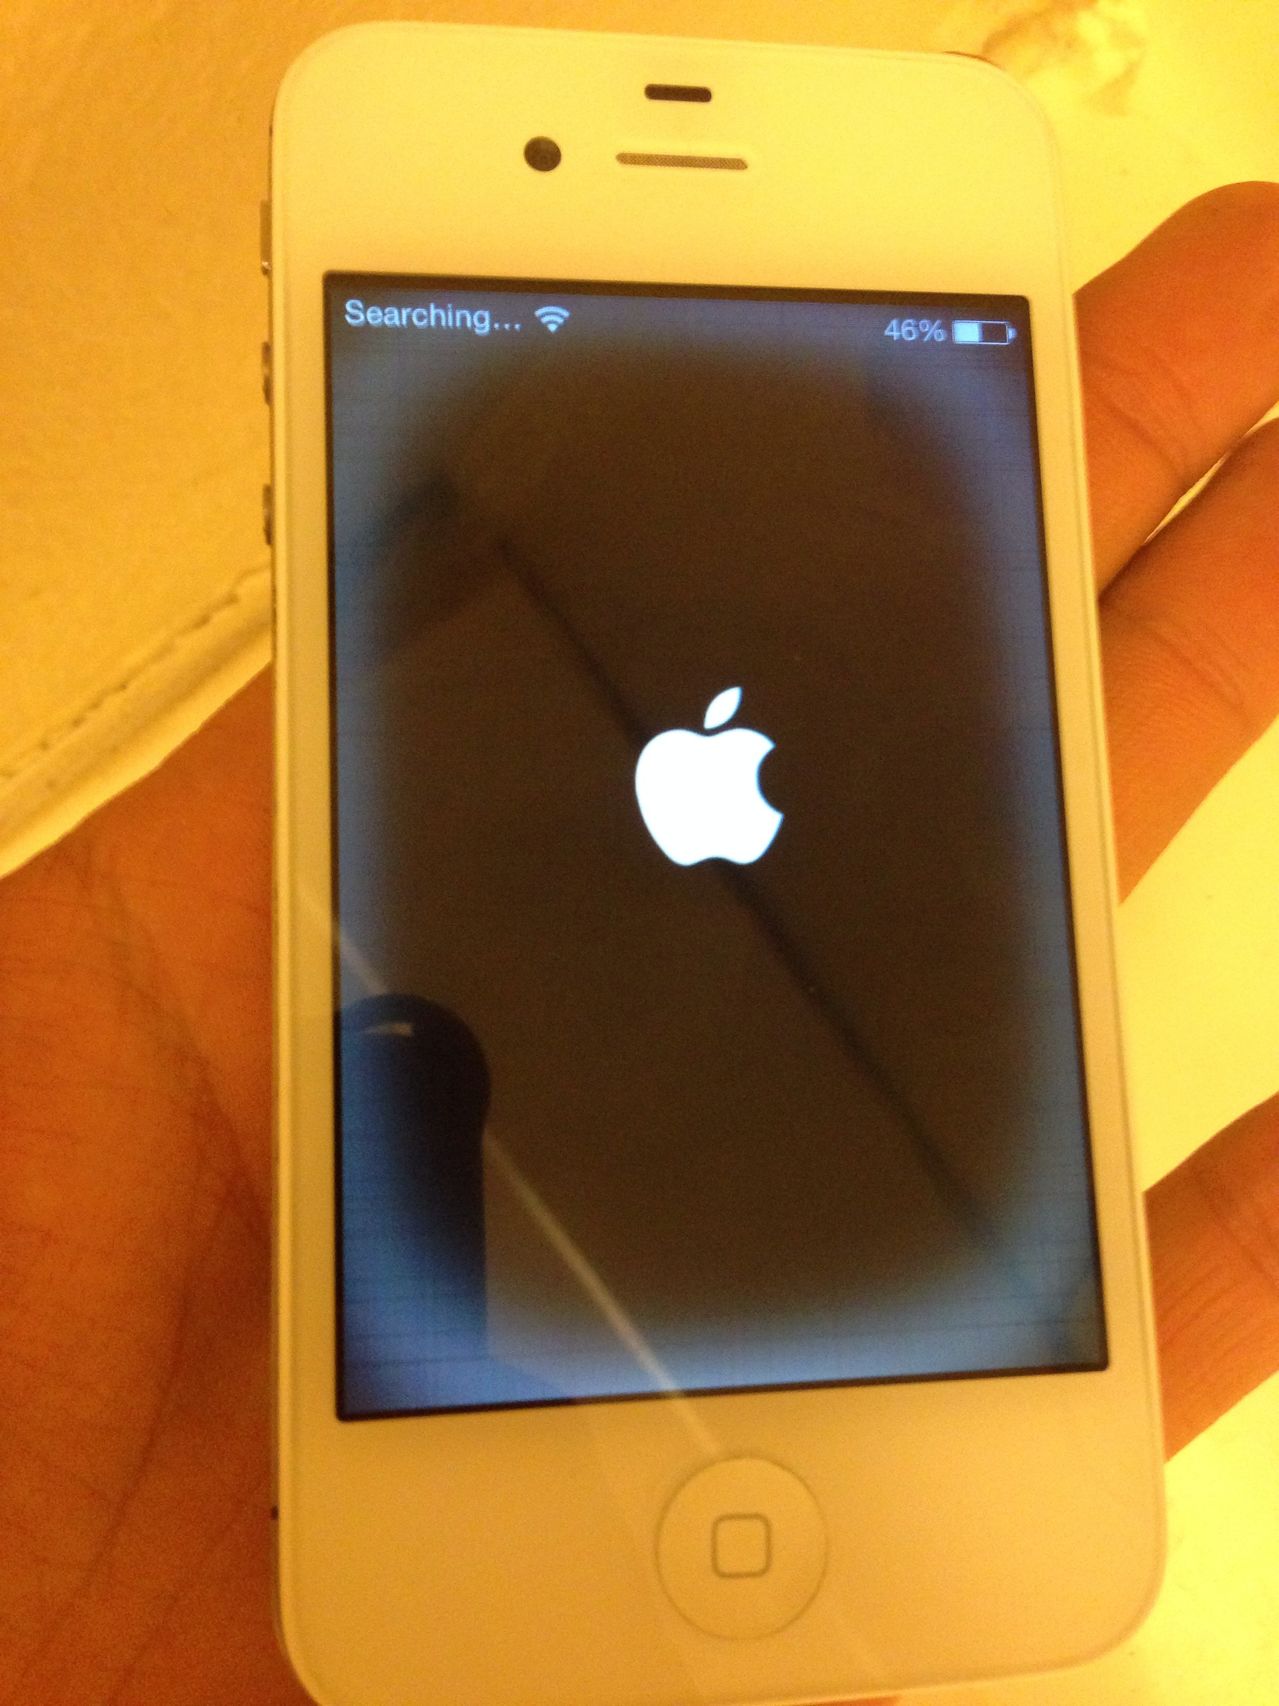 IPhone 4S screen replaced now it s flickering